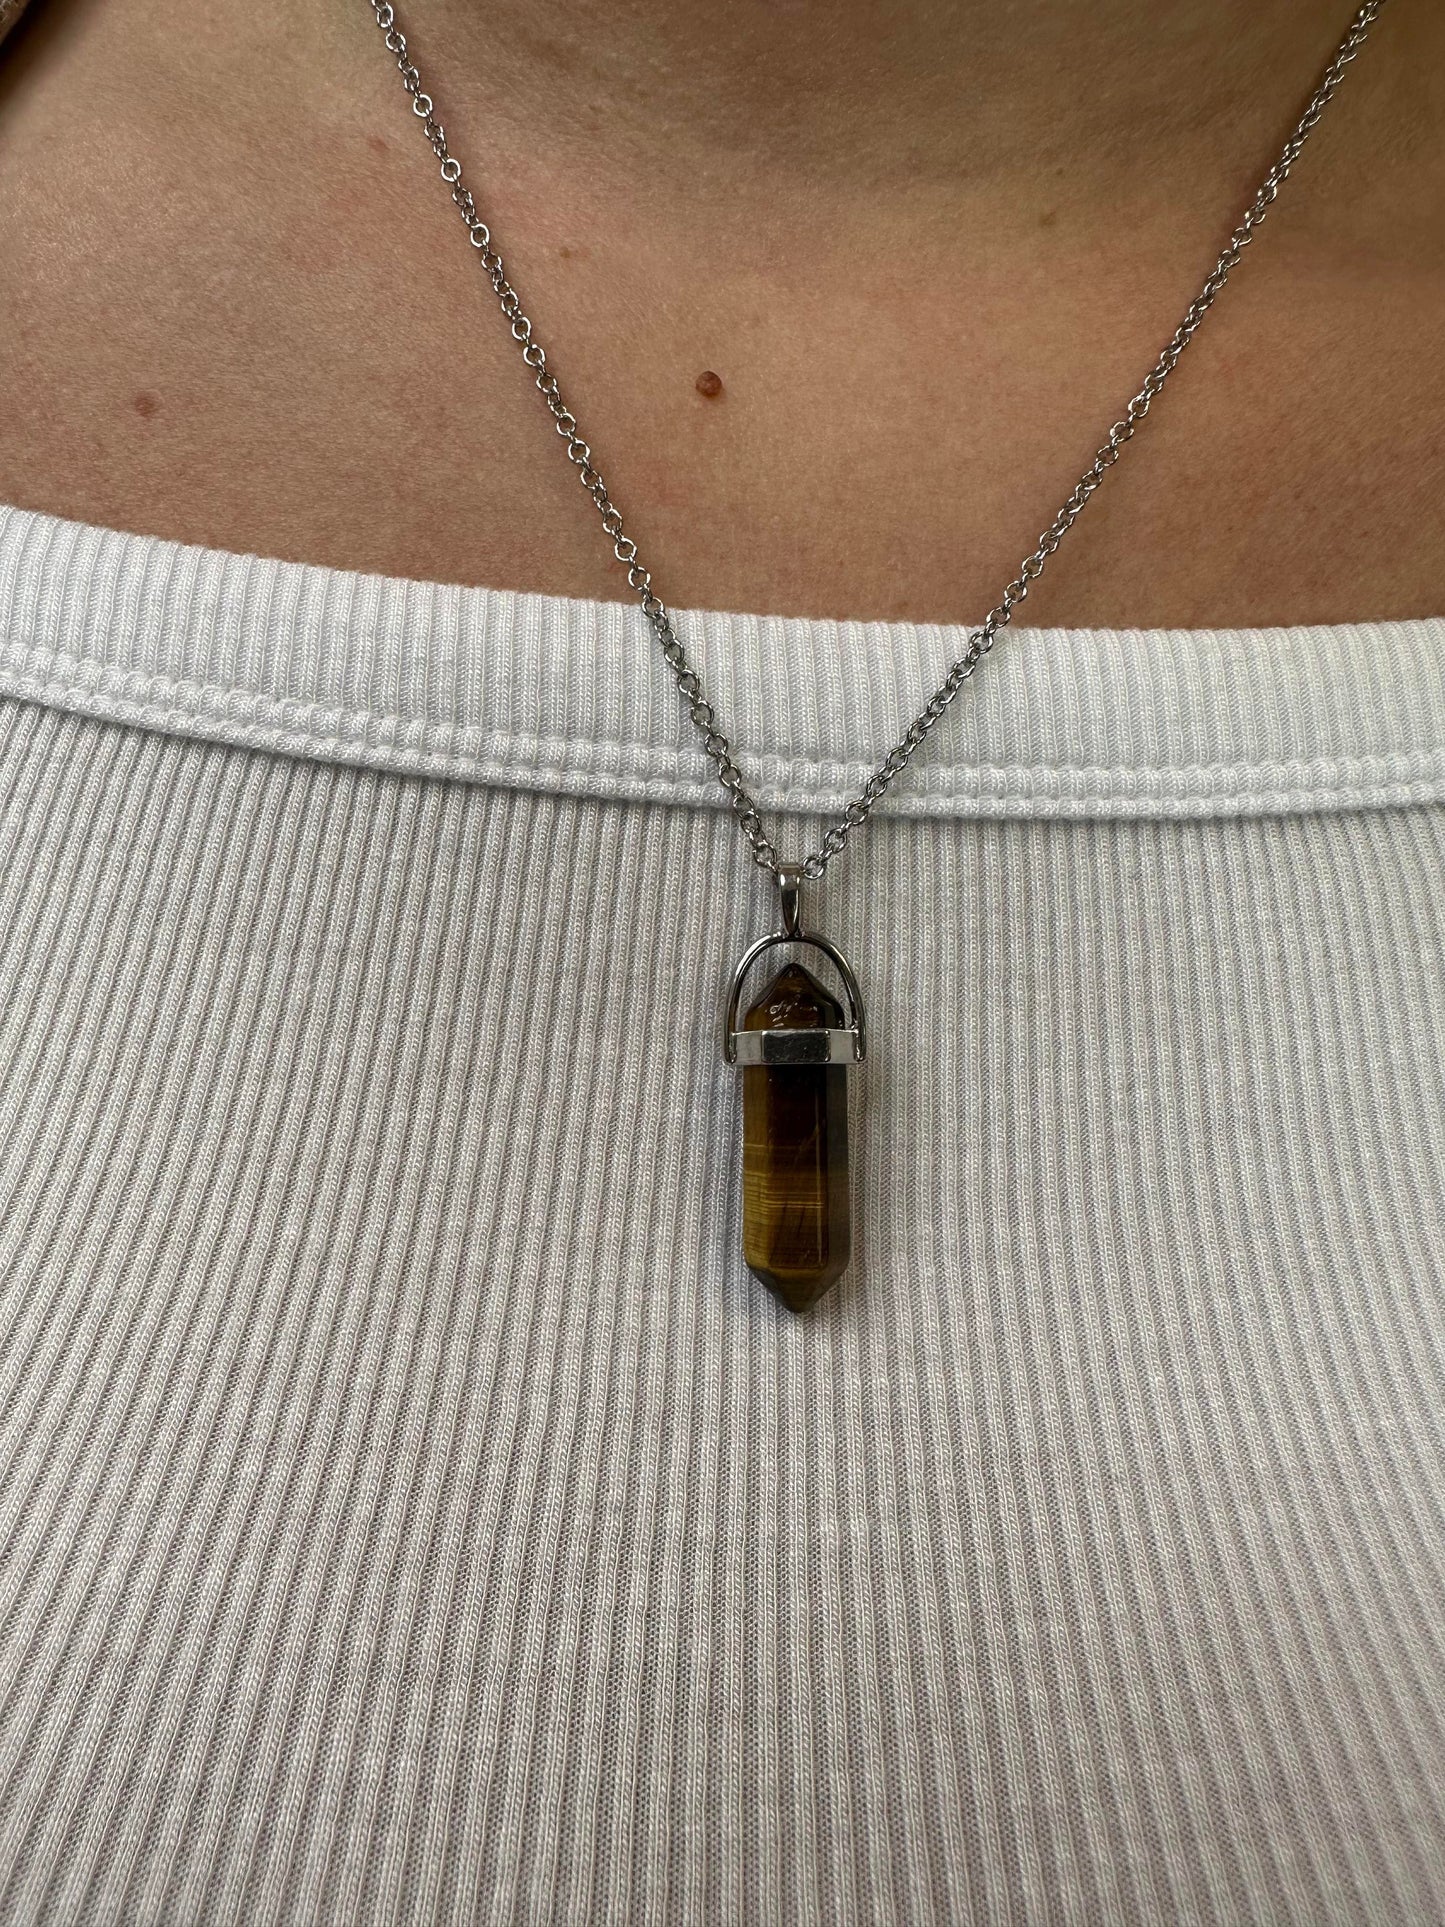 Tigers Eye Necklace - Three Bears Boutique